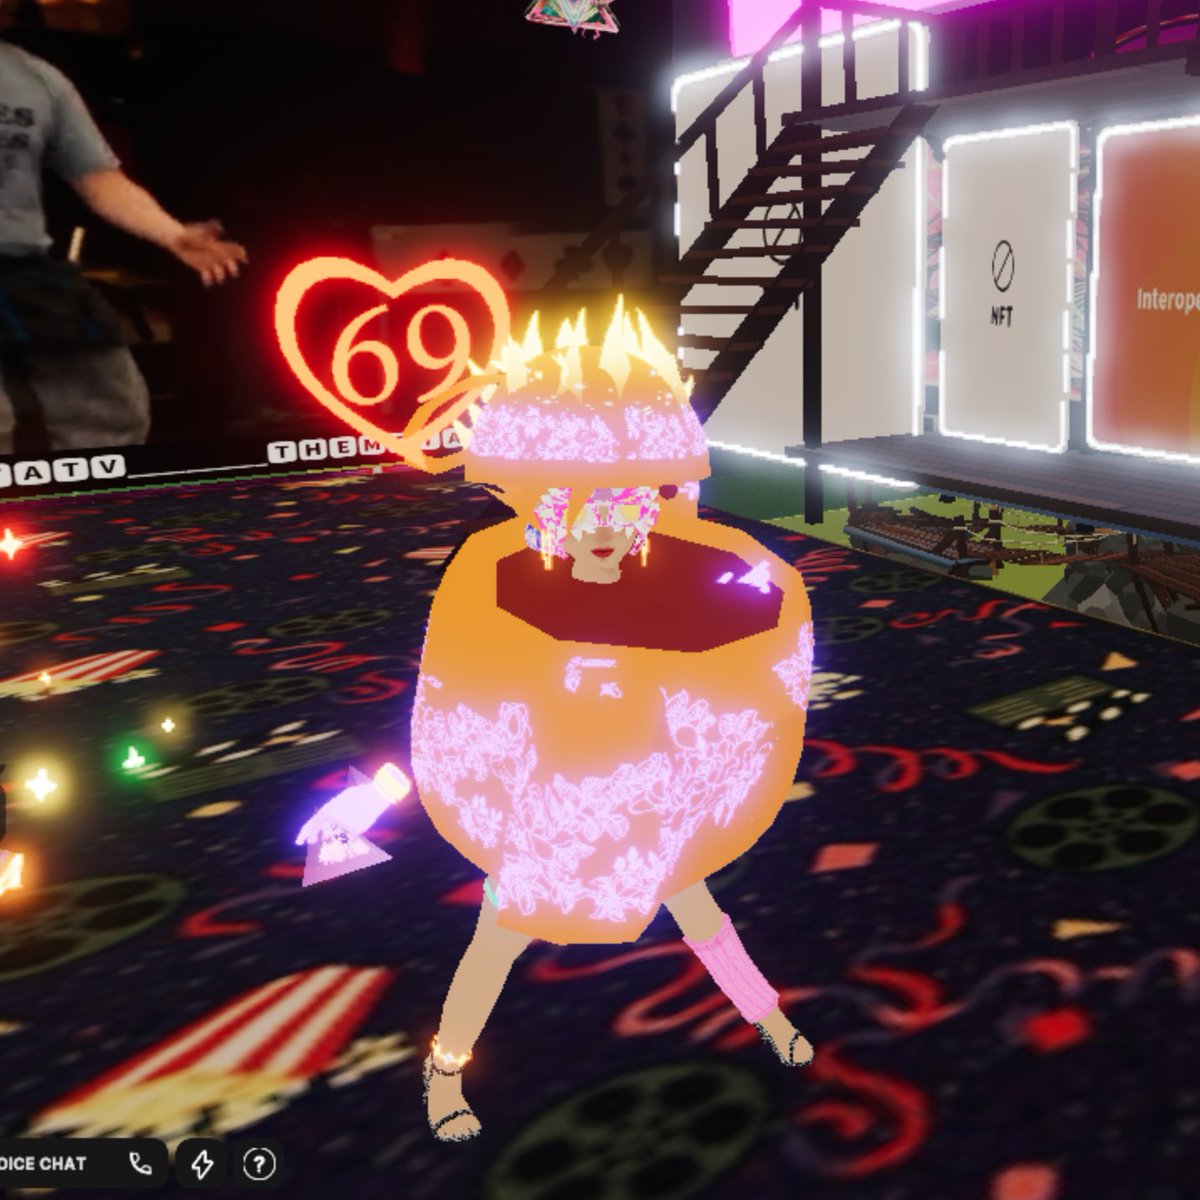 Decentraland @decentraland @BillyTeacoin Thank You for the suits and fun emote. There is nothing I love more than the fantastic creators in Decentraland. @BillyTeacoin @fancydcl @bitcinema @vtatveth @Doki3D @8ritny @Aeon_Smash @real_siswyd @CardinalQuack @nftbubblegum @_0xQuan